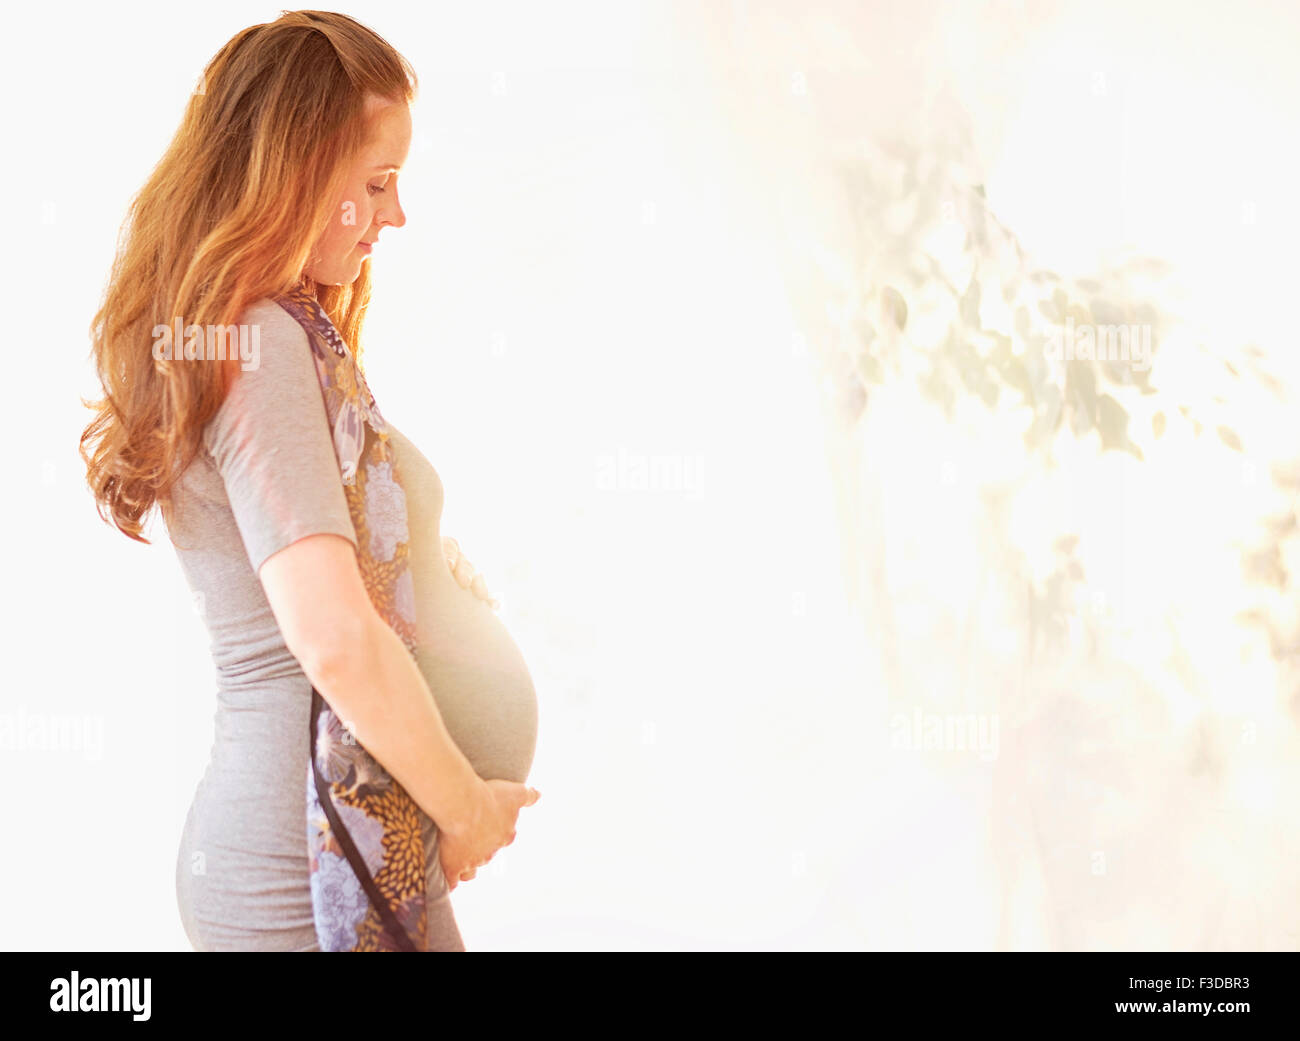 Side view of pregnant woman outdoors Stock Photo